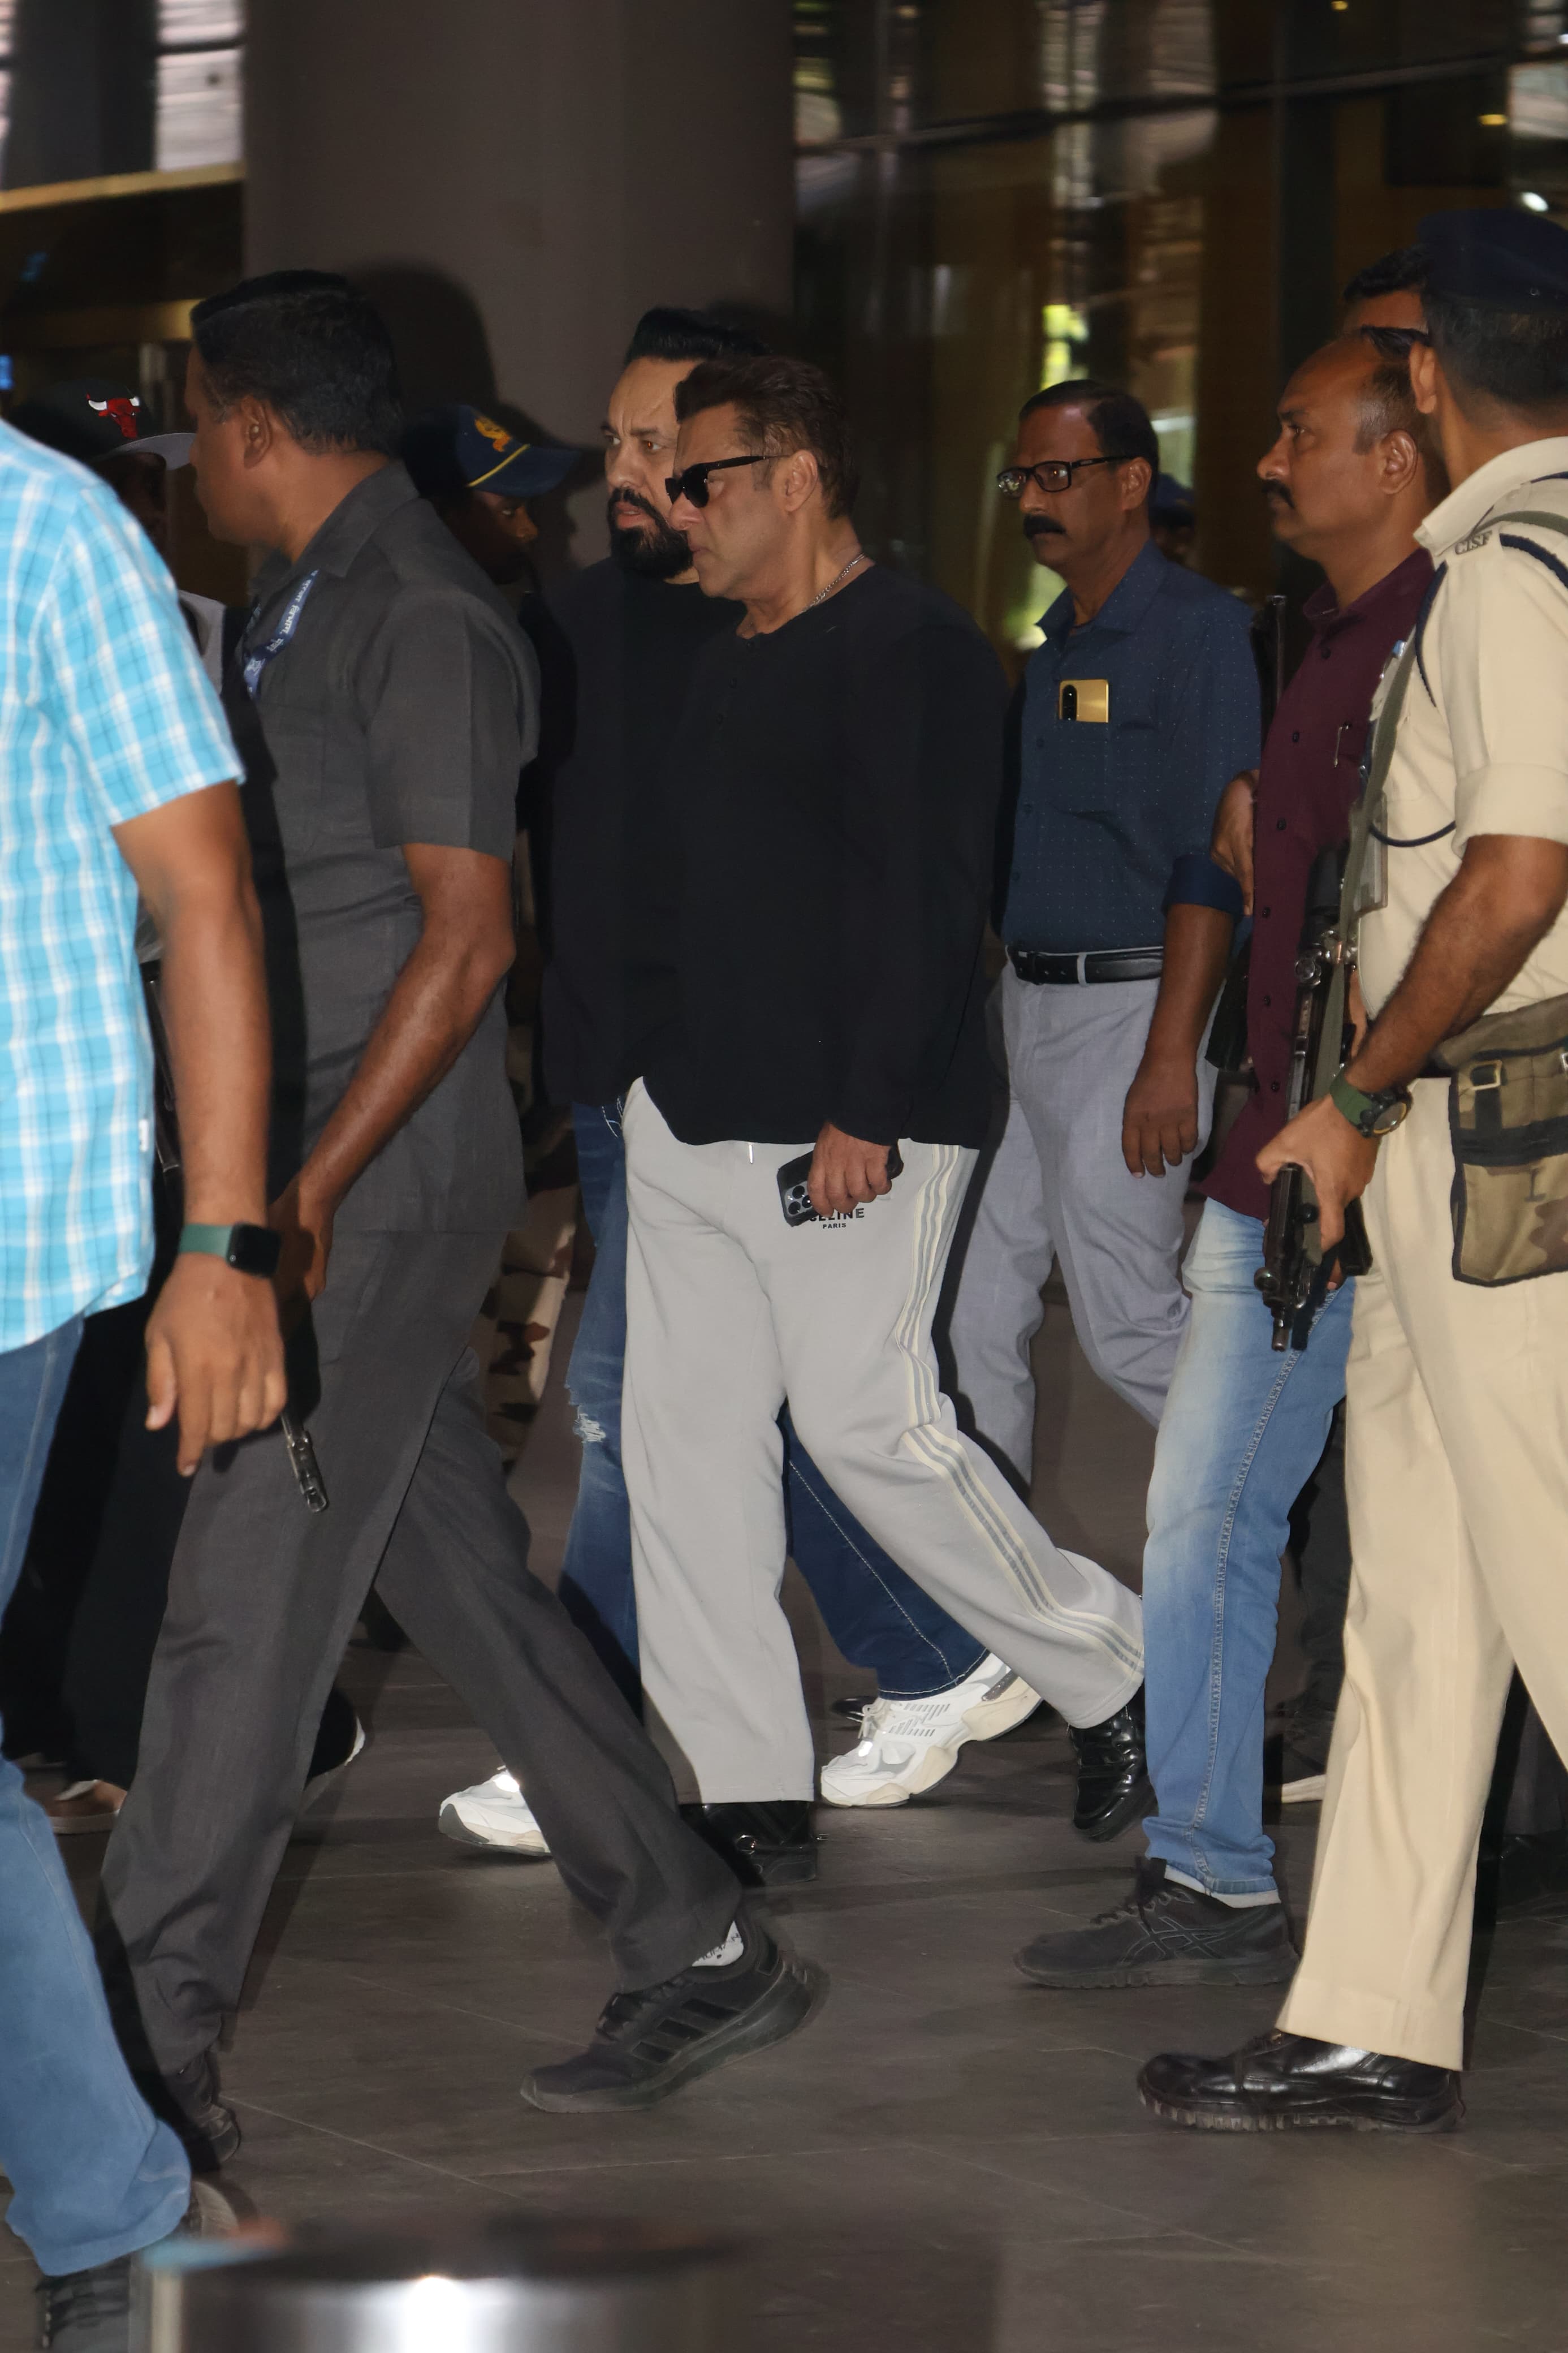 Afer an enjoyable time in Dubai, Salman Khan was seen arriving in Mumbai with tight security